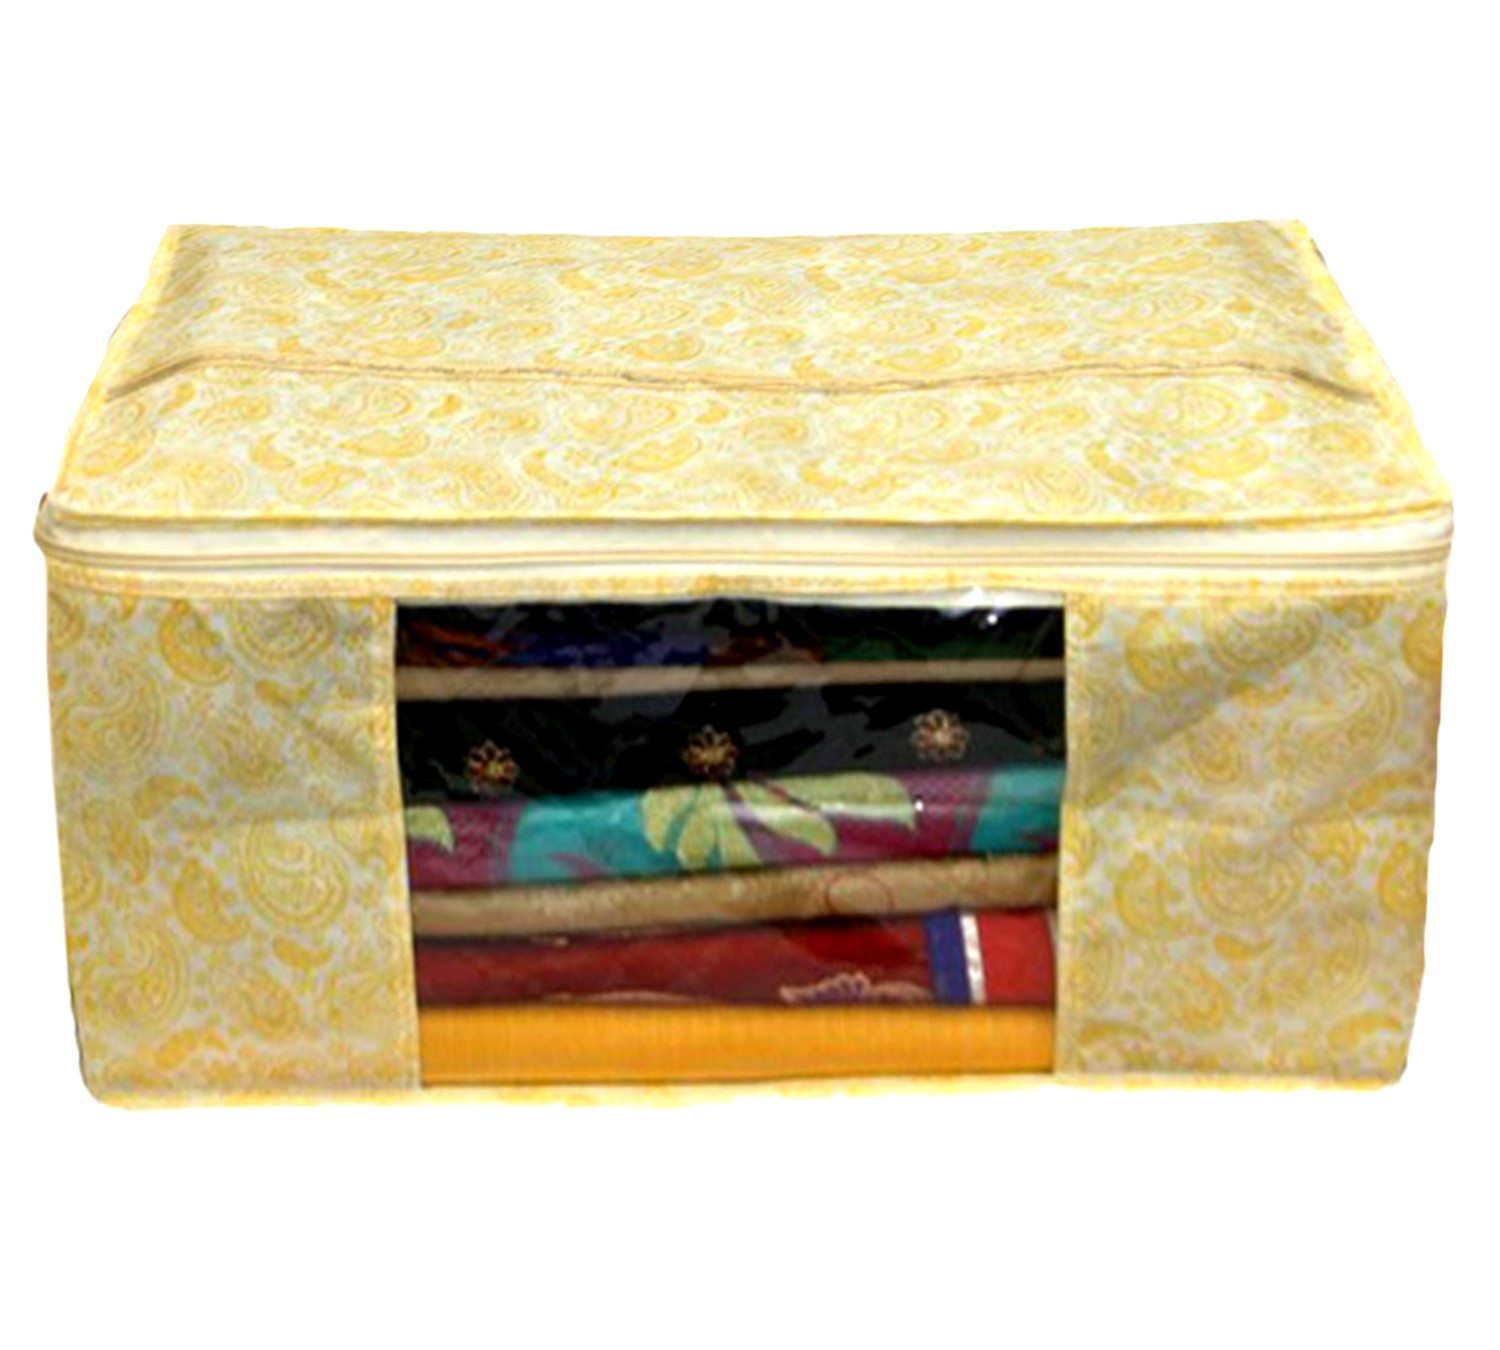 Kuber Industries Metalic Printed Non Woven Saree Cover And Underbed Storage Bag, Storage Organiser, Blanket Cover, Green & Gold -CTKTC42393